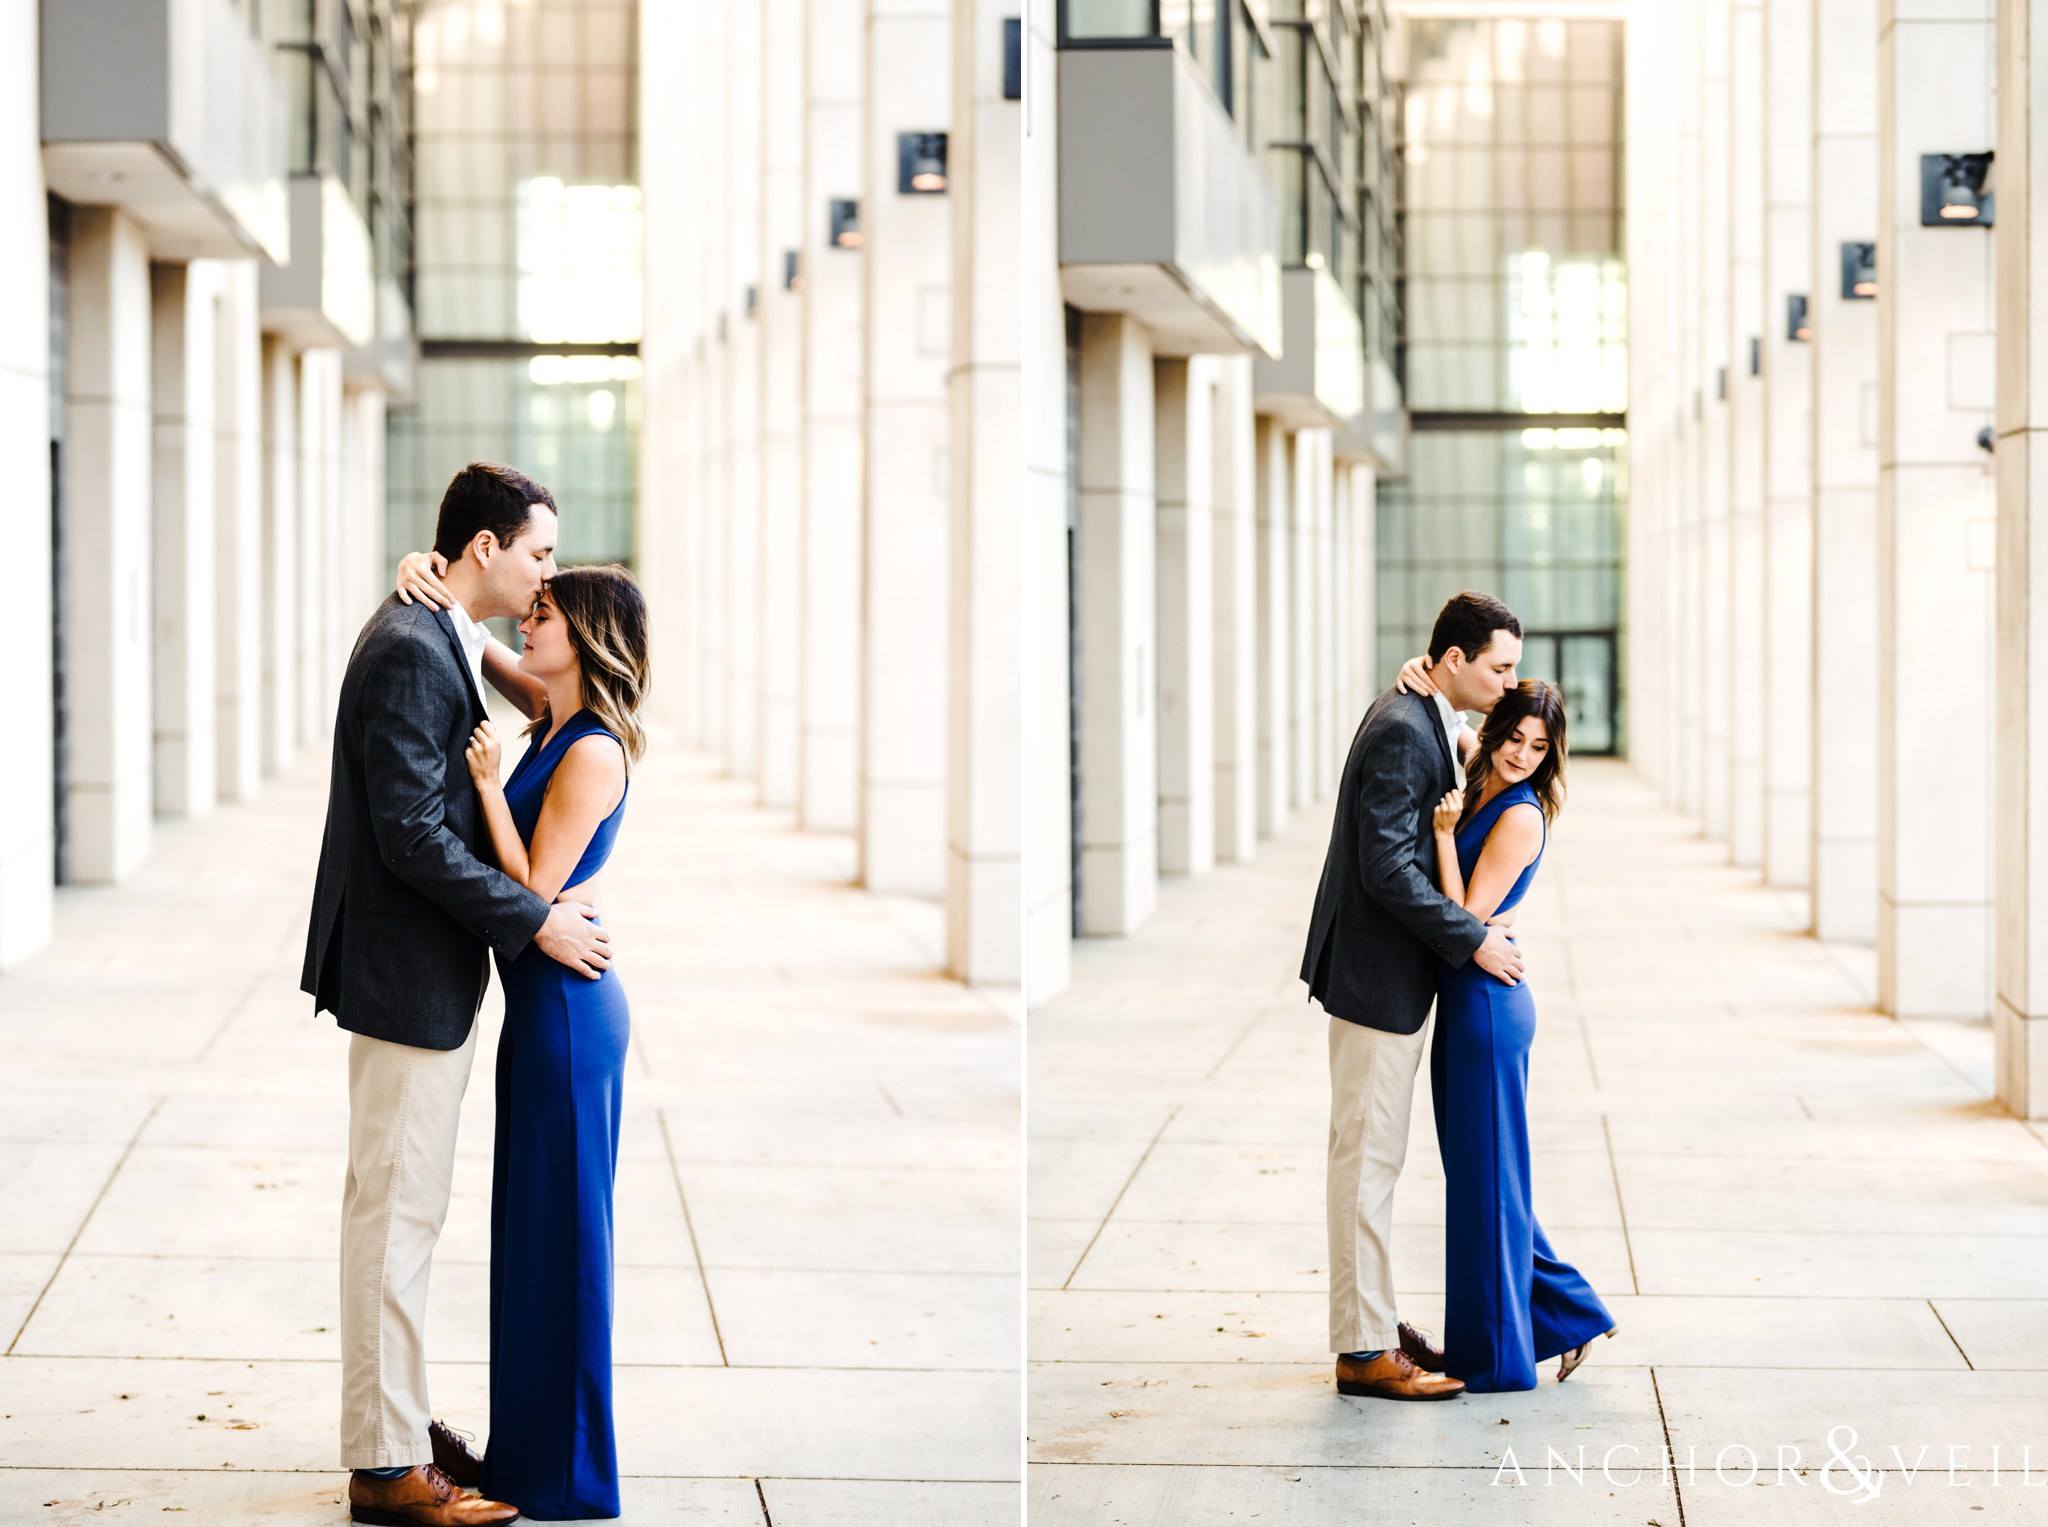 kissing on the forehead In the lines during the Uptown Charlotte Sycamore Brewery Engagement Session